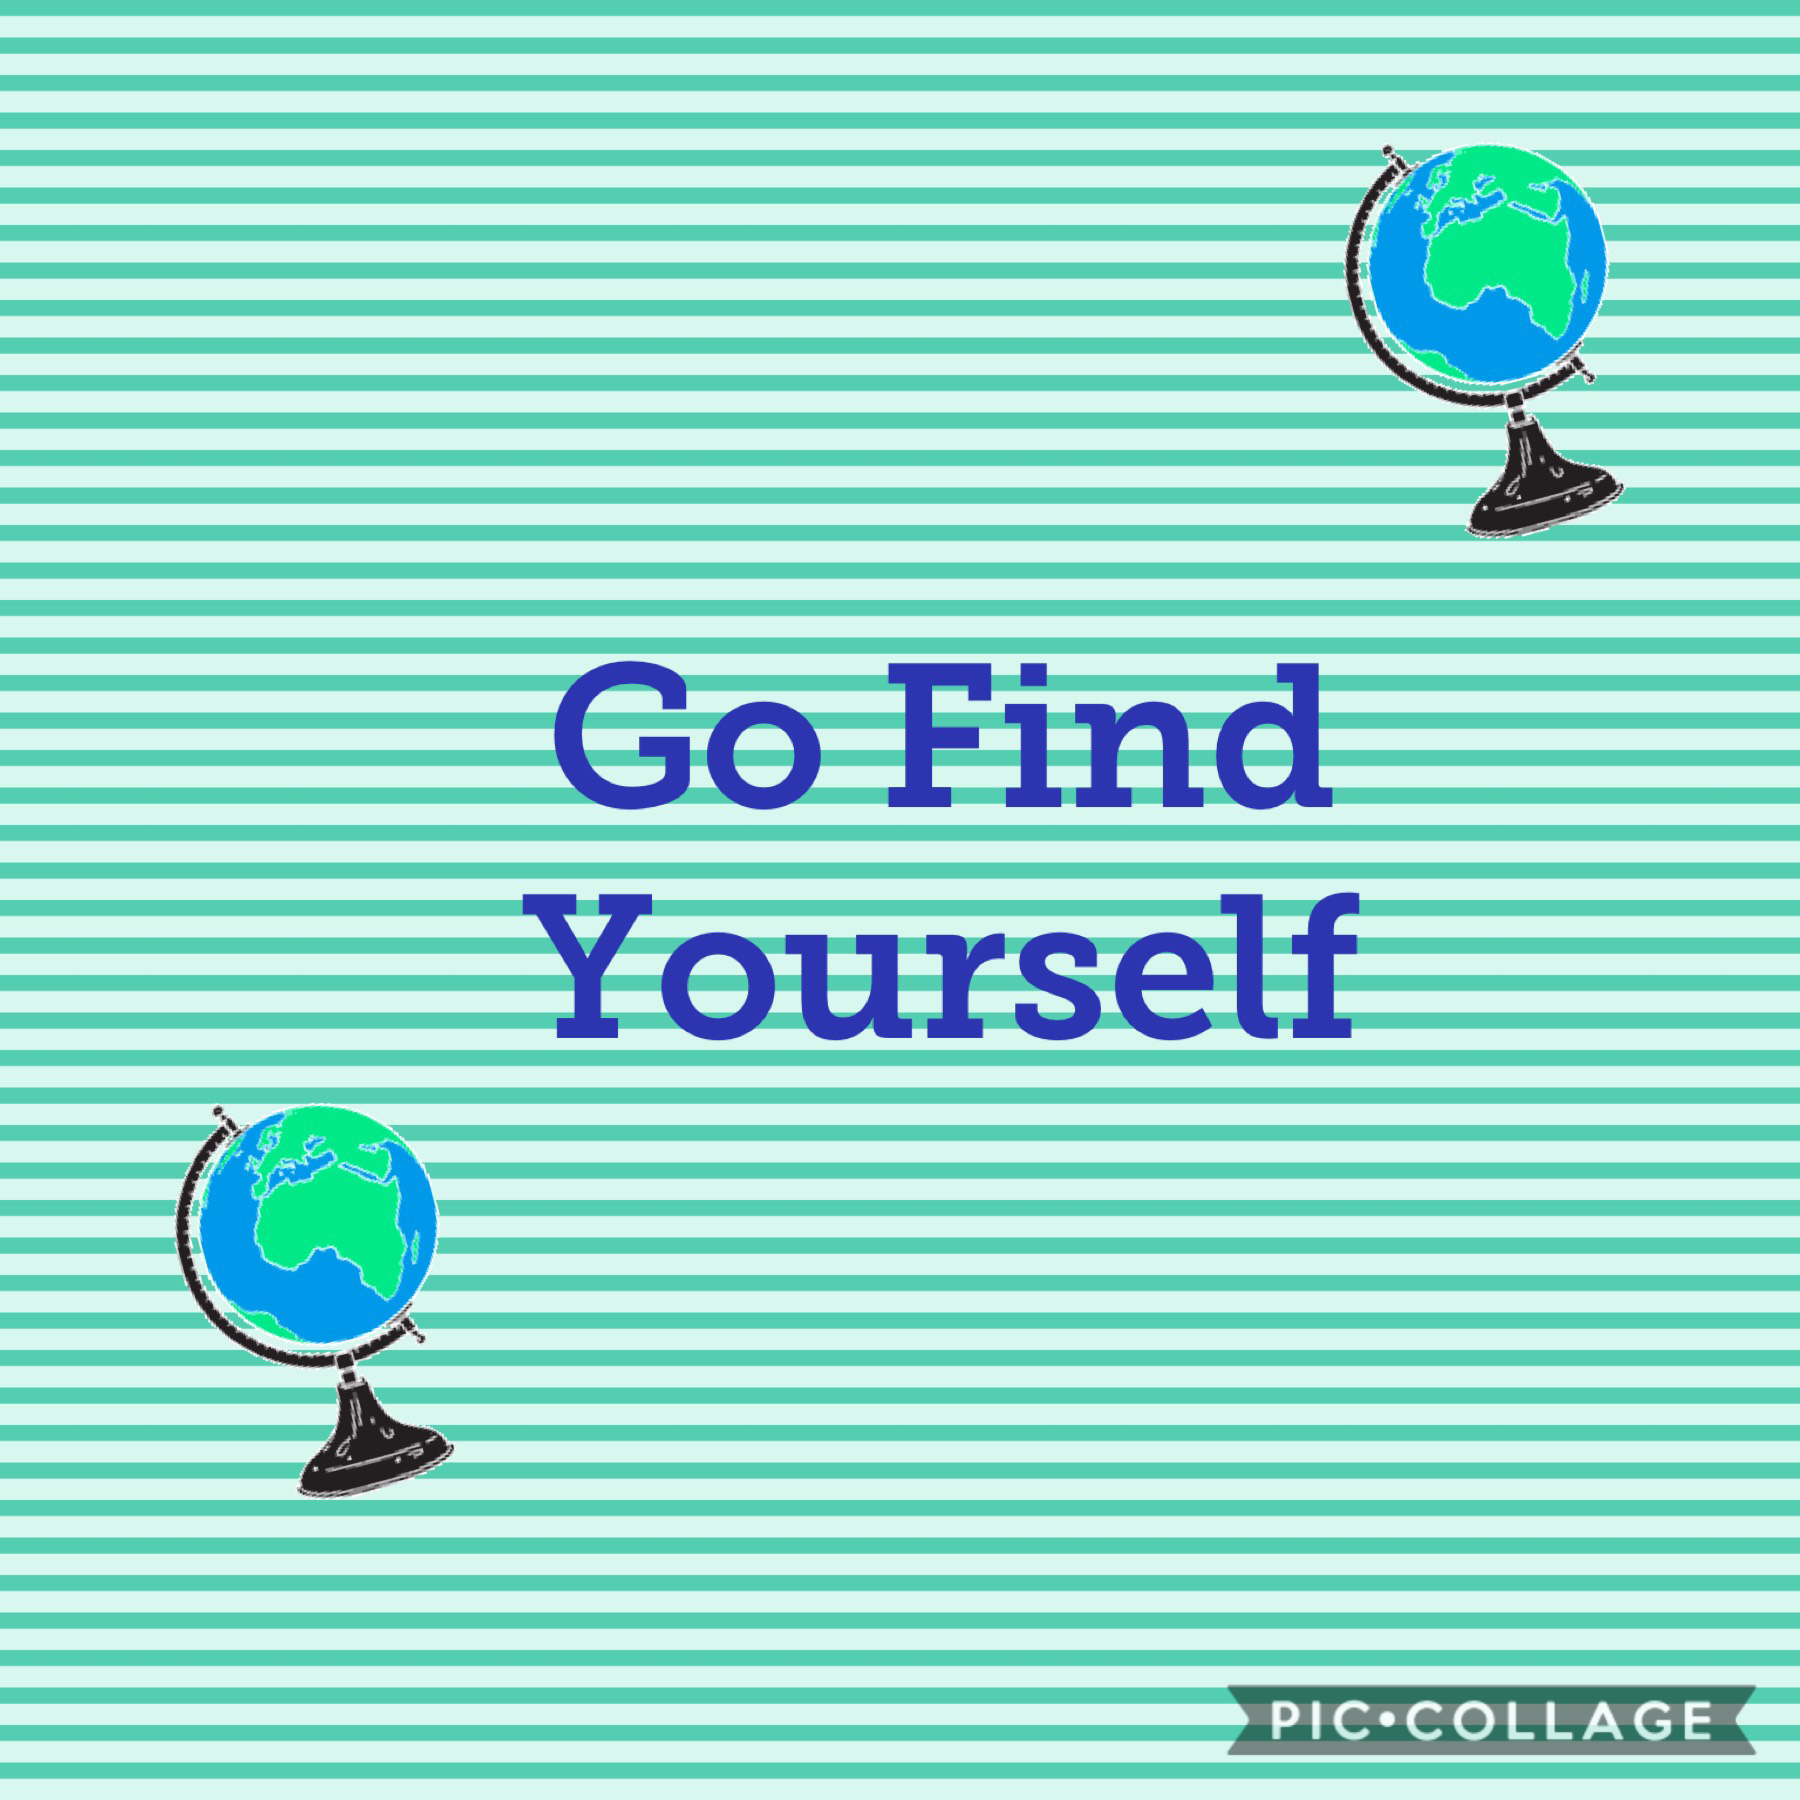 GO FIND YOURSELF!